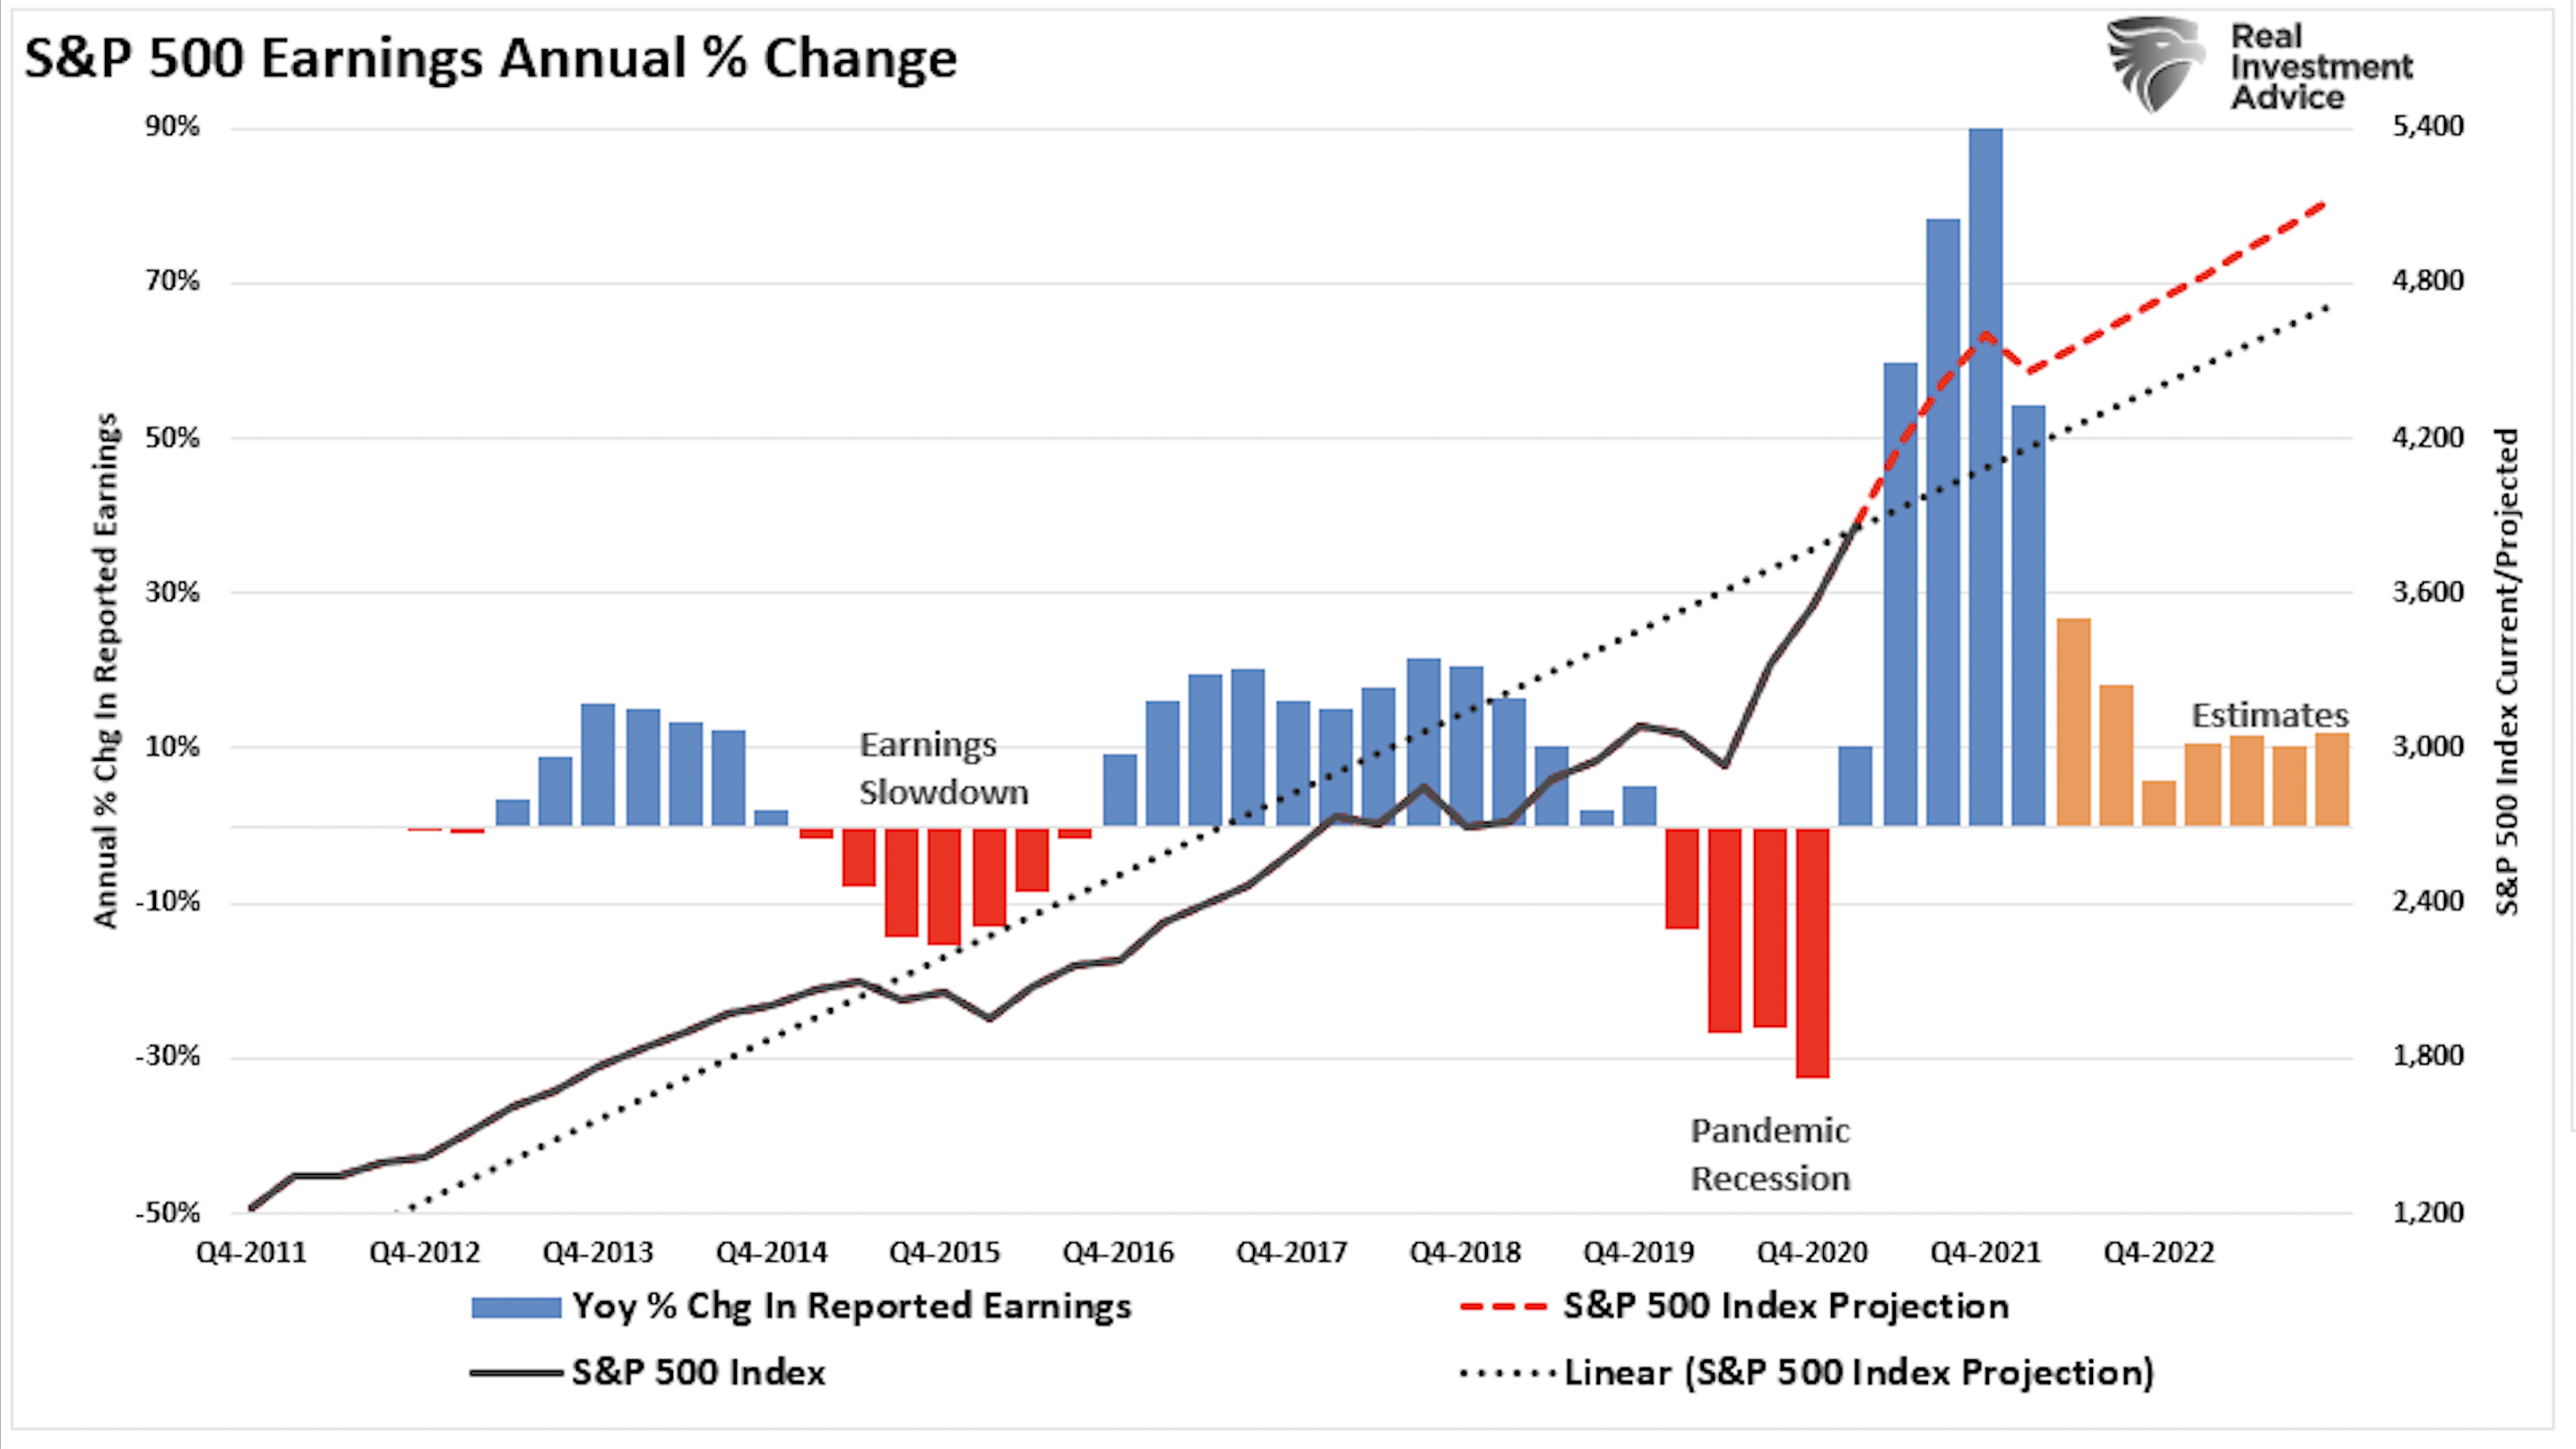 S&P 500 Earnings Annual Percentage Change